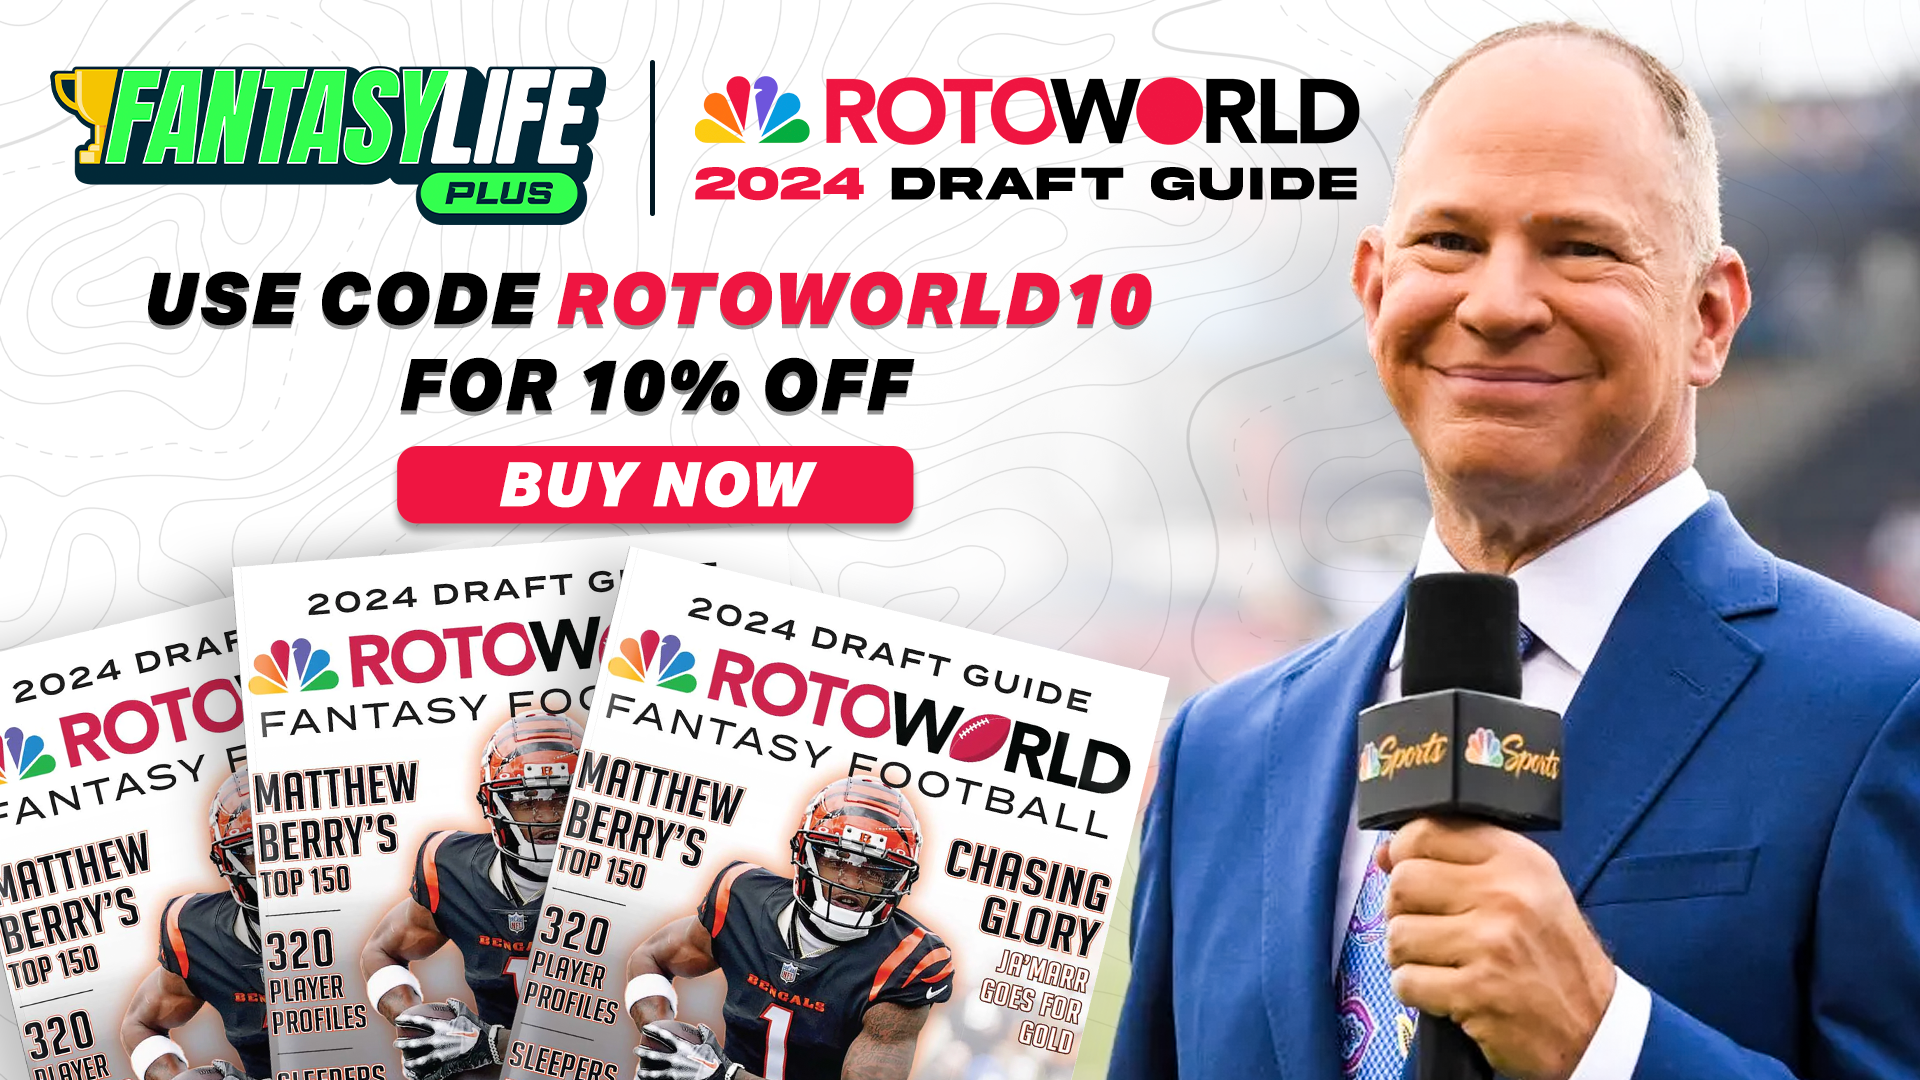 Get FantasyLife+ featuring the Rotoworld Draft Guide!